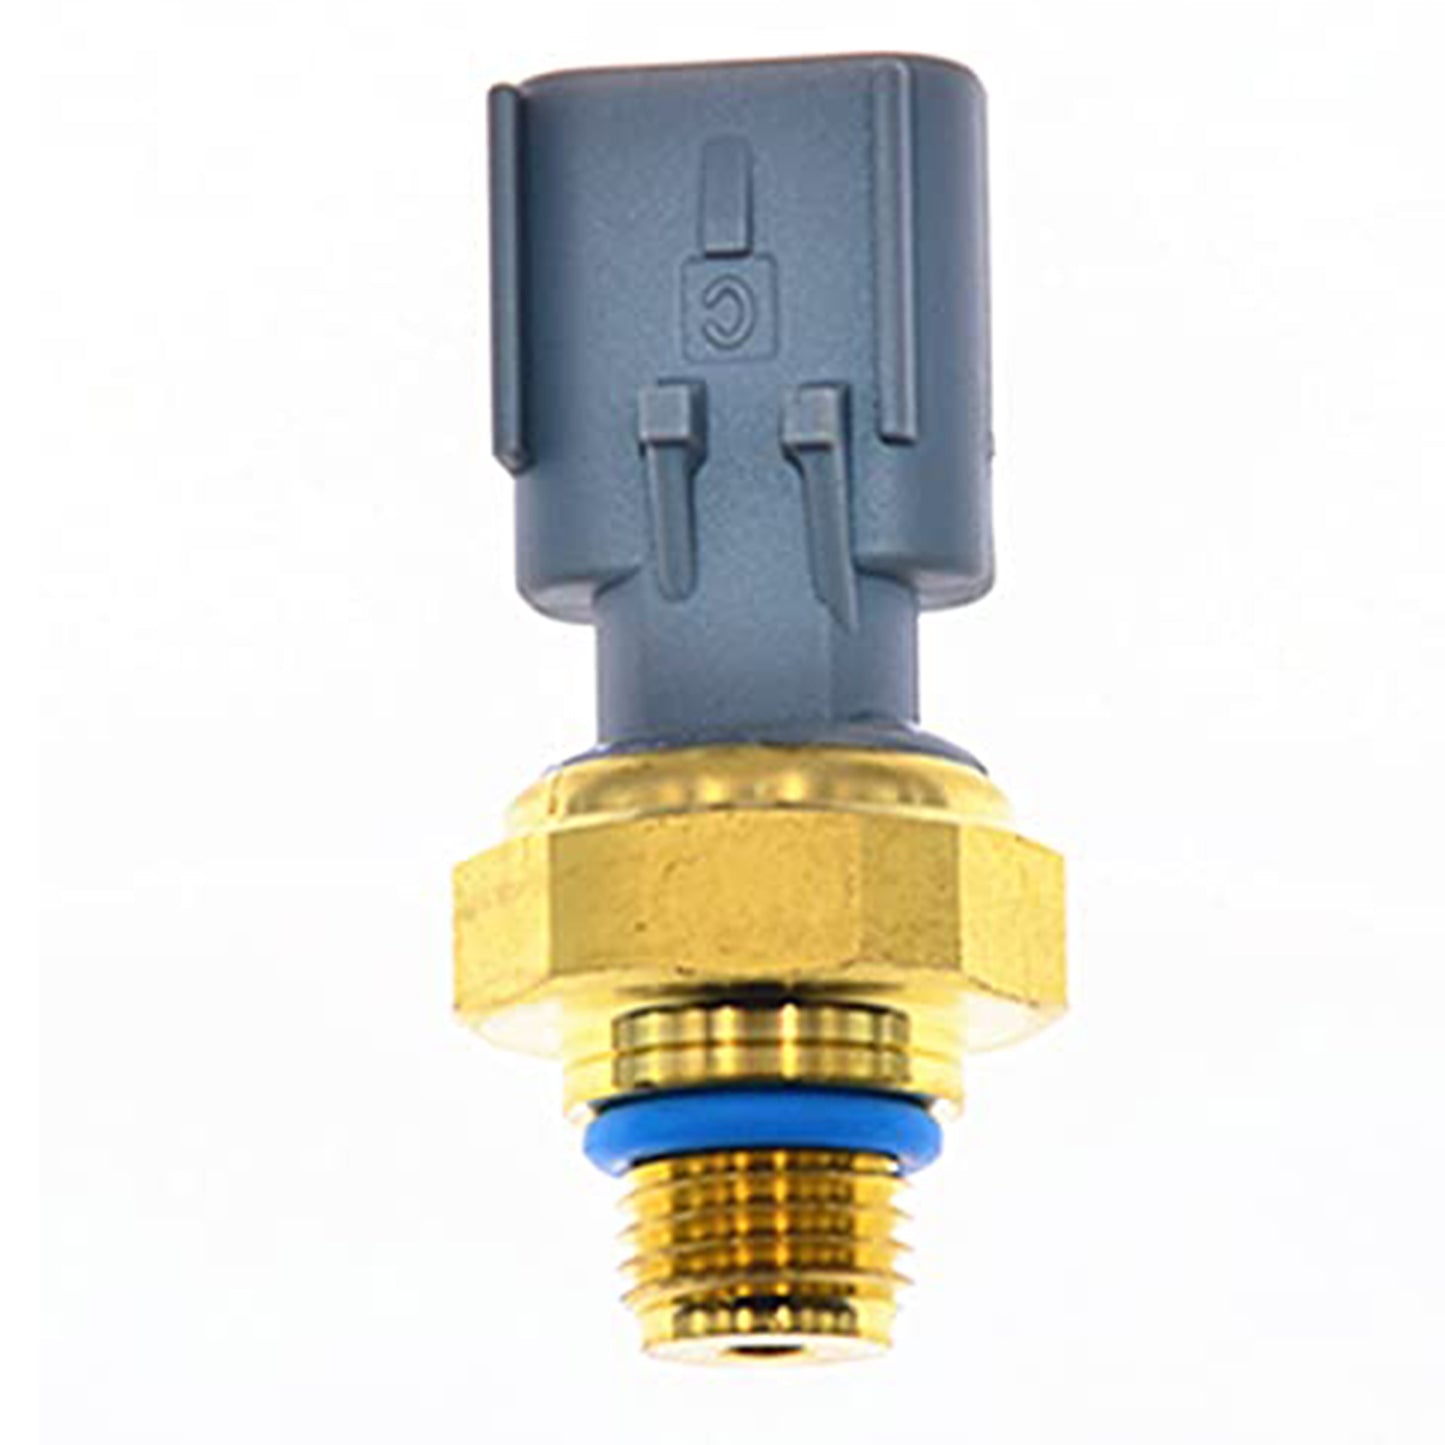 4928594 Exhaust Gas Pressure Sensor Compatible With Cummins ISX ISM ISC ISL ISB ISF 2.8 3.8